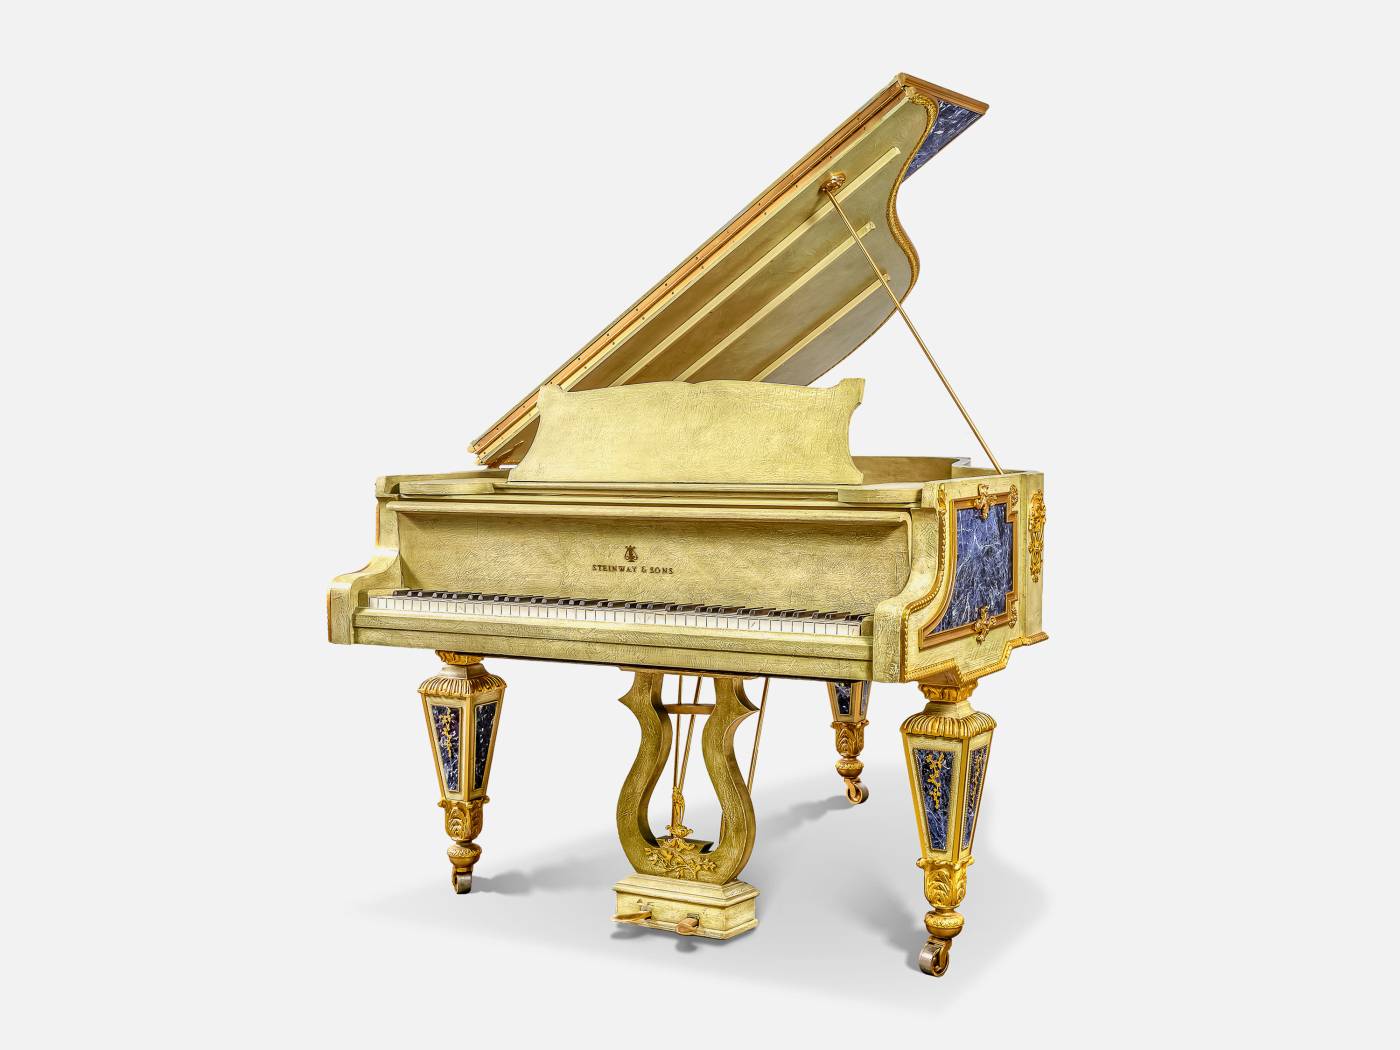 ART. 2706 - C.G. Capelletti quality furniture and timeless elegance with luxury made in italy contemporary Pianos.